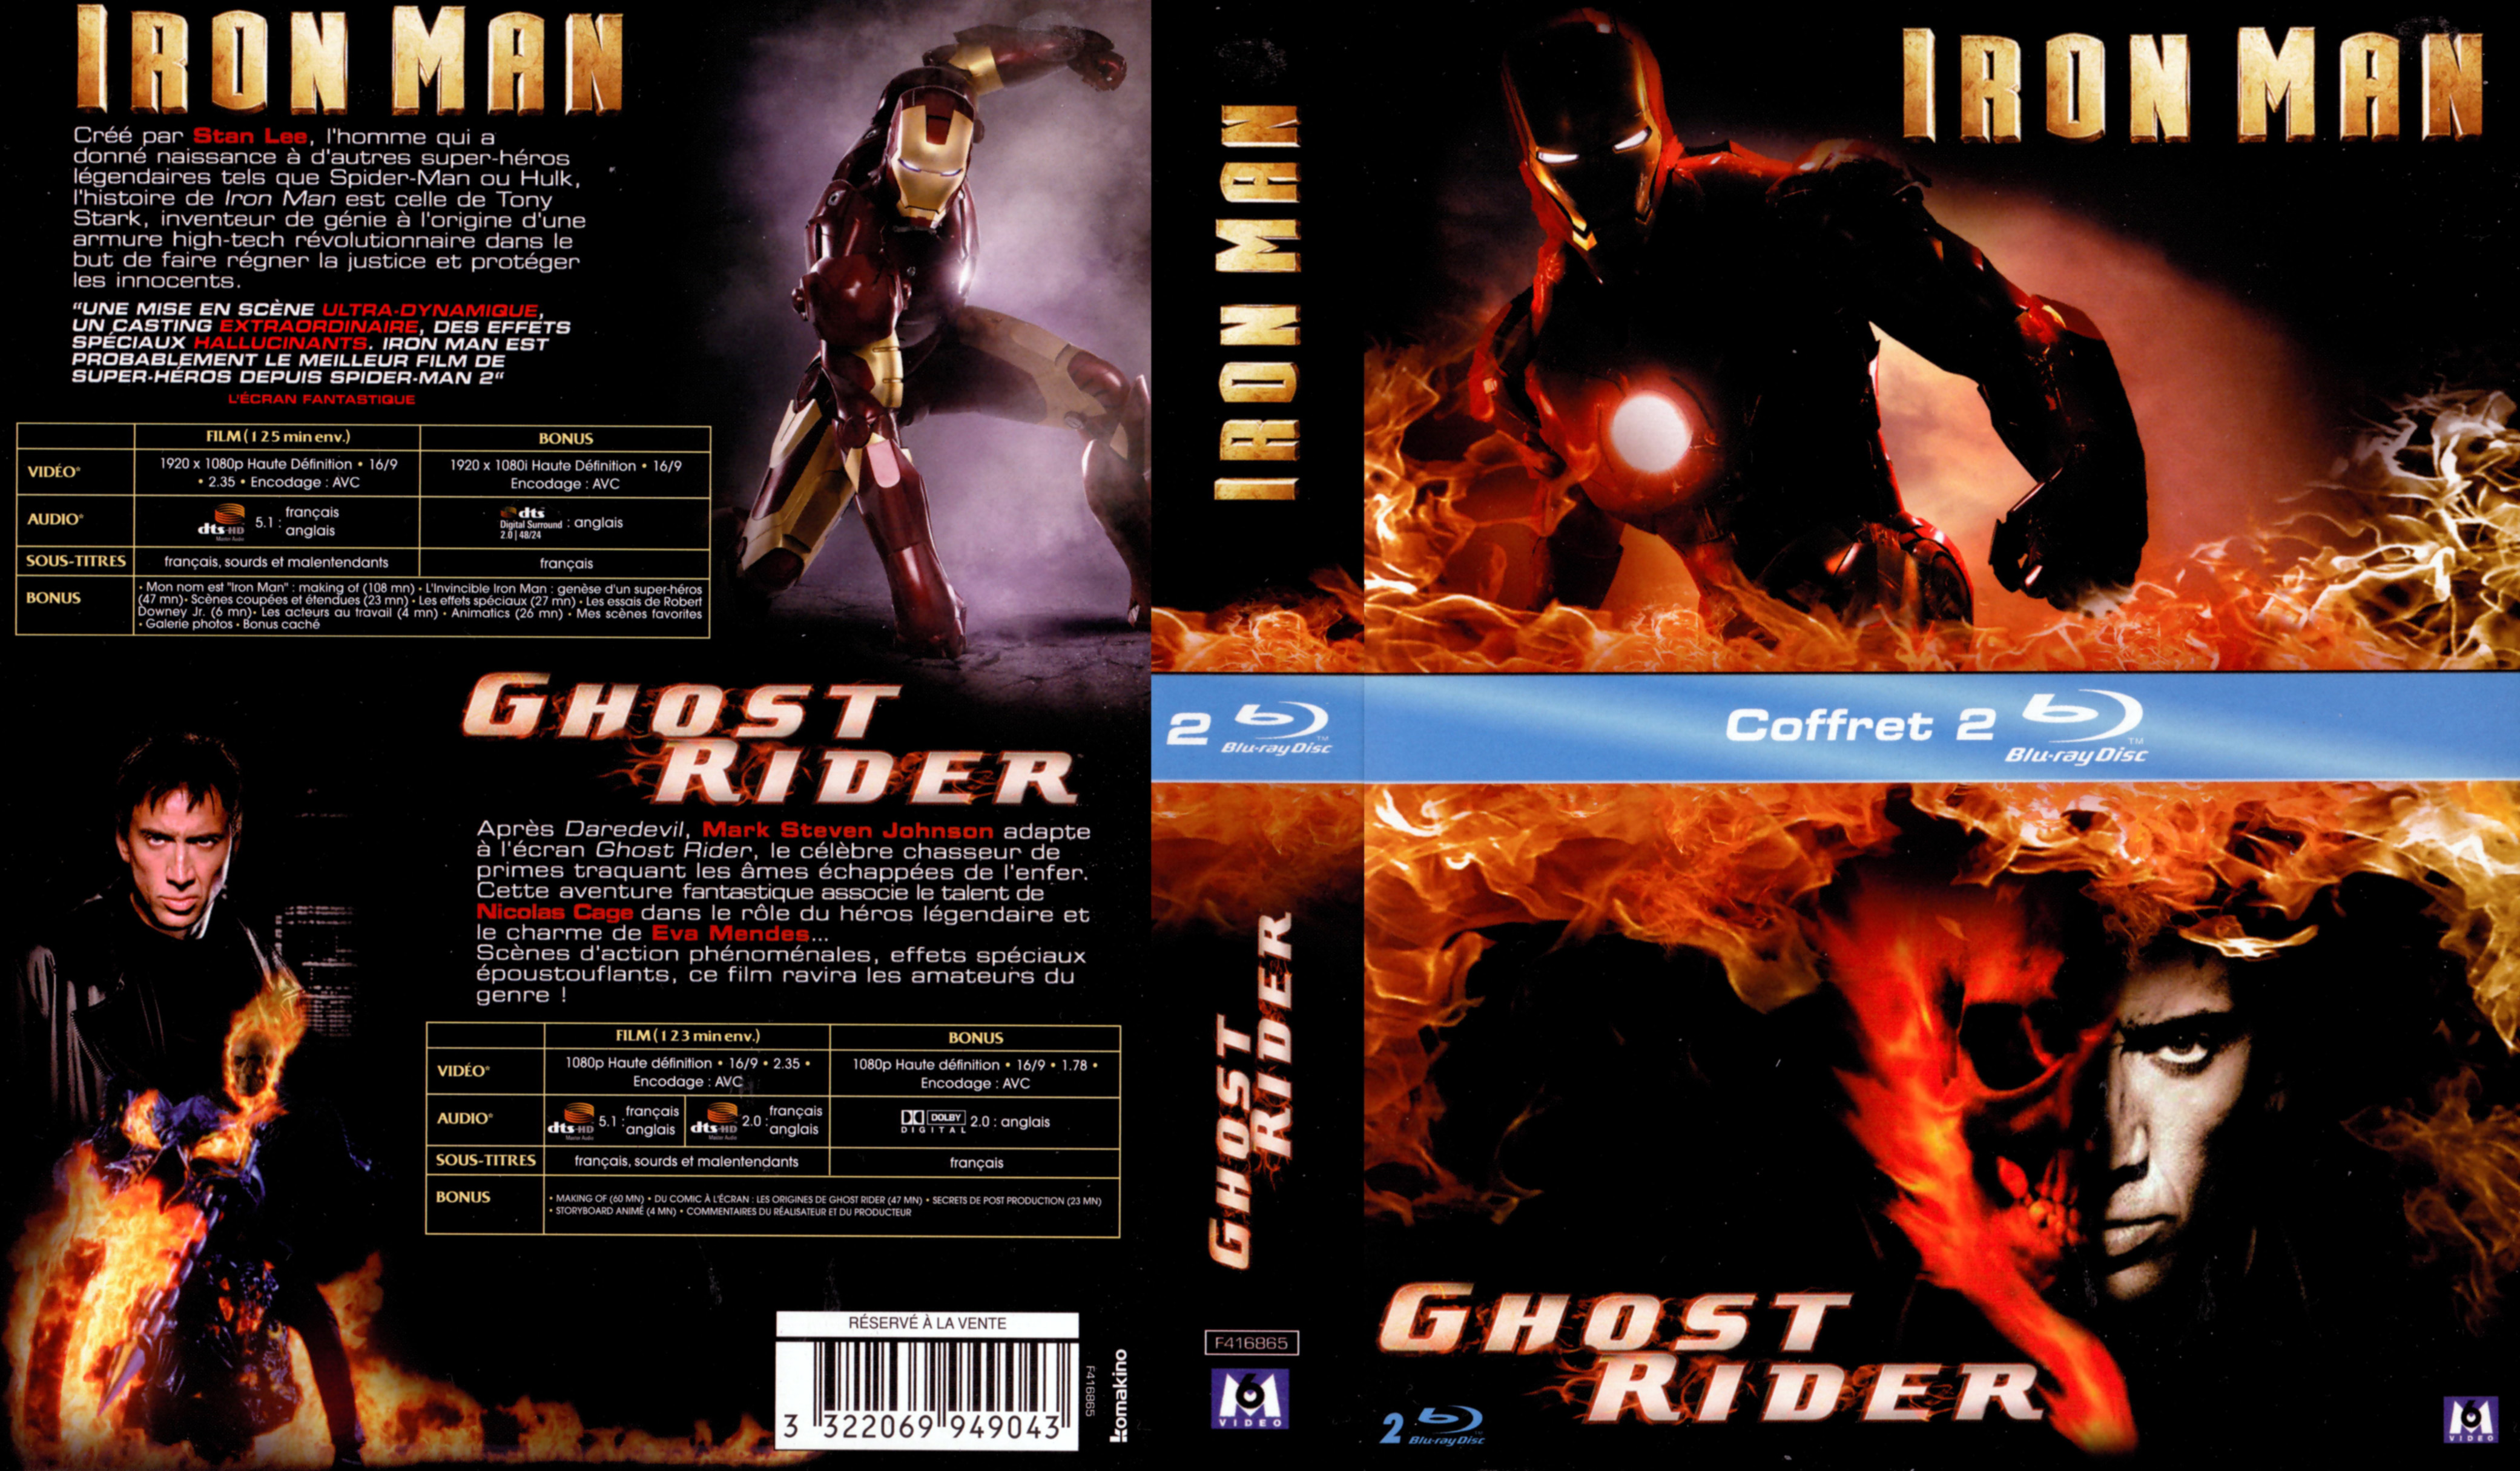 Jaquette DVD Iron man + Ghost rider (BLU-RAY)